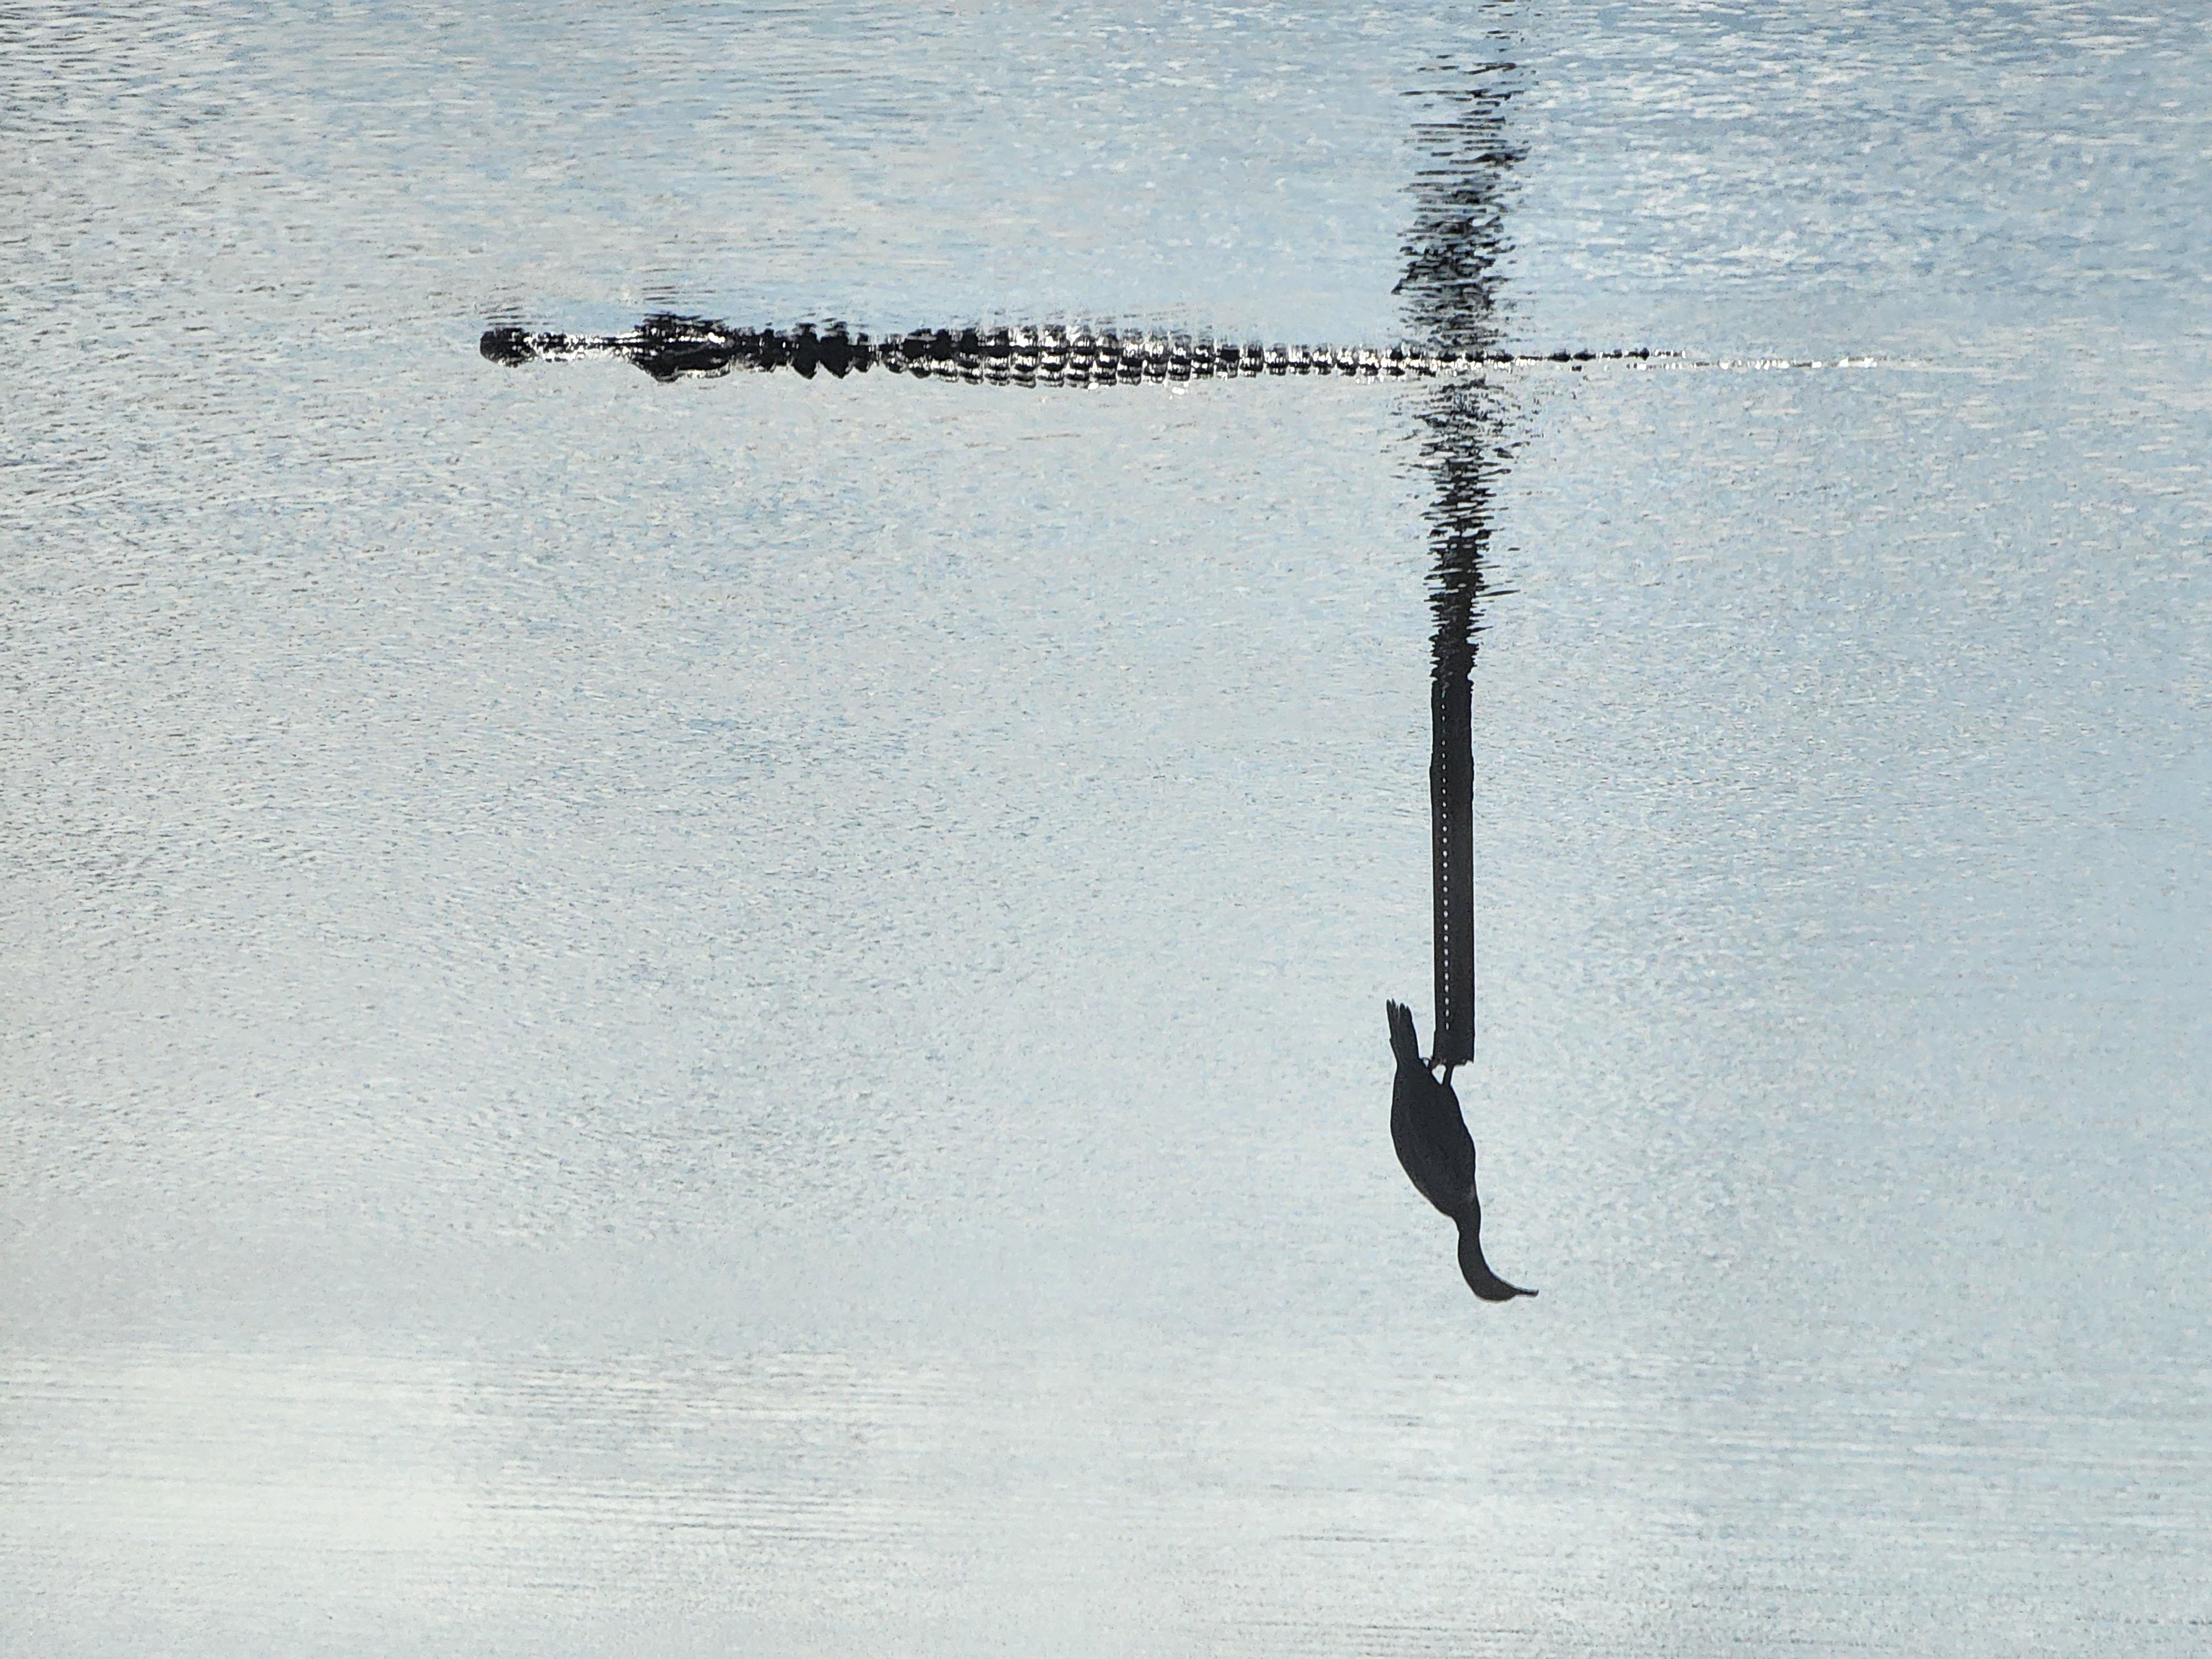 A bird sits on a wooden pole elevated above the water, while a crocodile swims languidly in the sparkling blue water below.